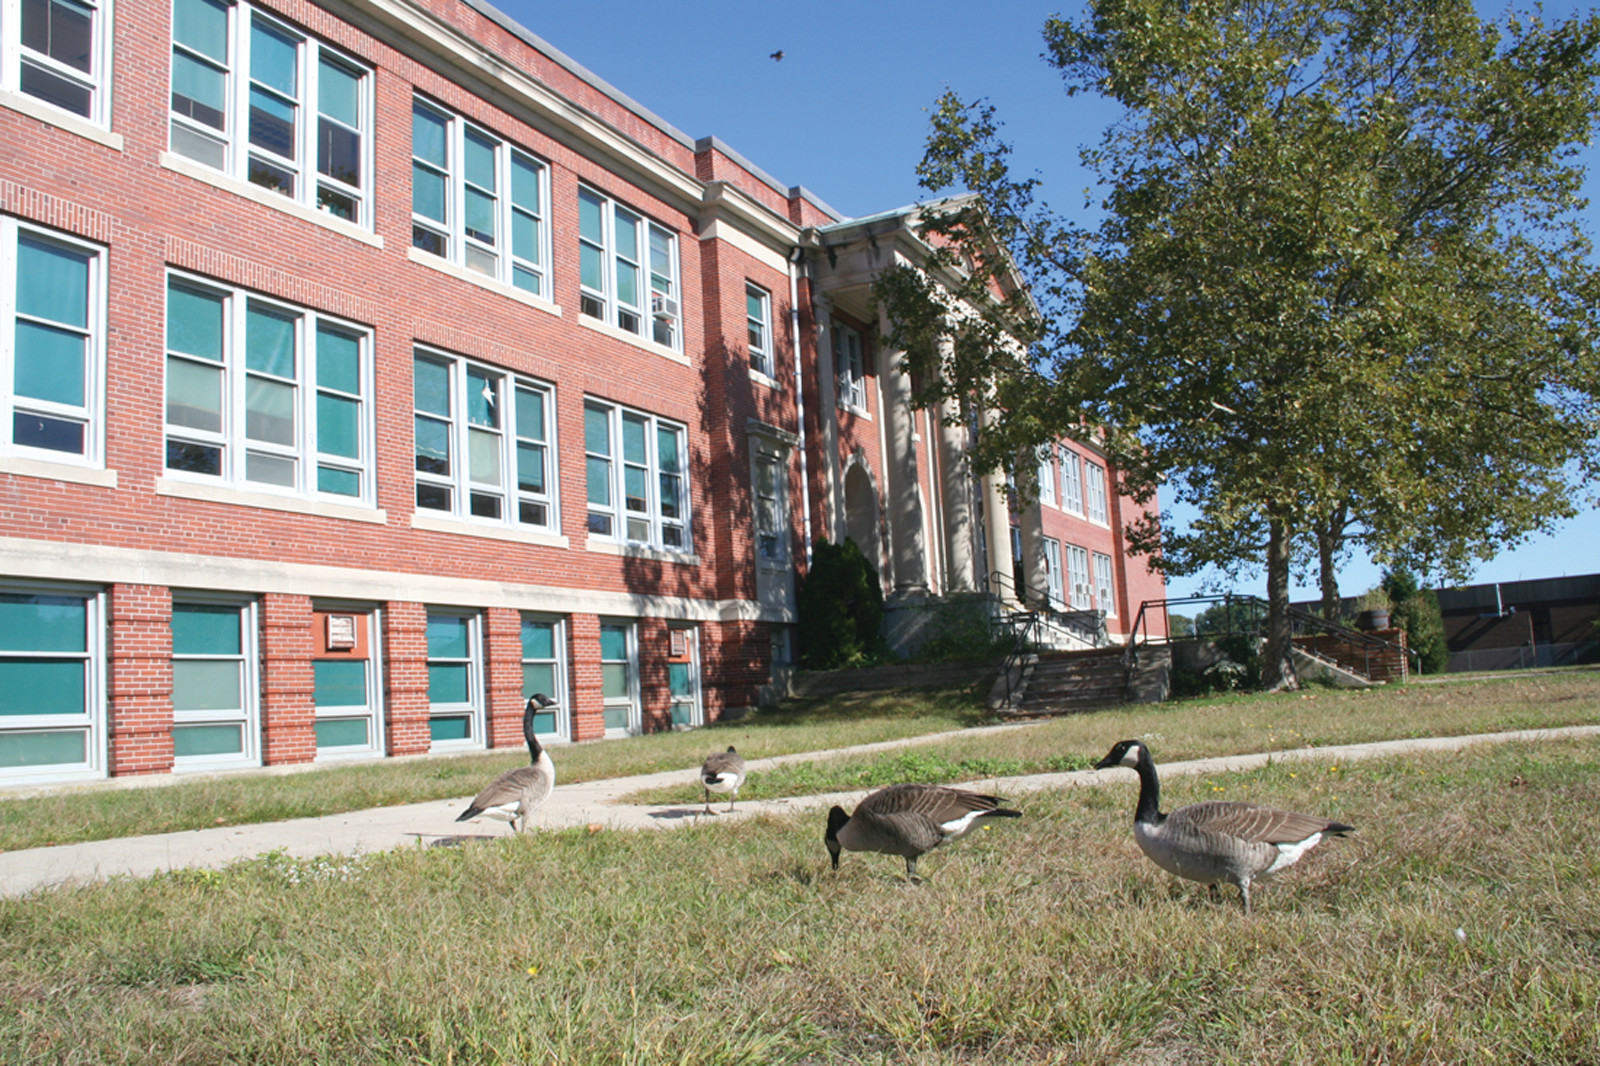 FLOCKING TO ALDRICH: The School Committee voted Tuesday night to turn over Aldrich Junior High to the city later this month. Superintendent Philip Thornton said yesterday the first two floors of the school, which was built in 1934, have been cleaned out and the basement is next. The city is preparing to advertise for proposals for the sale and future use of the building.